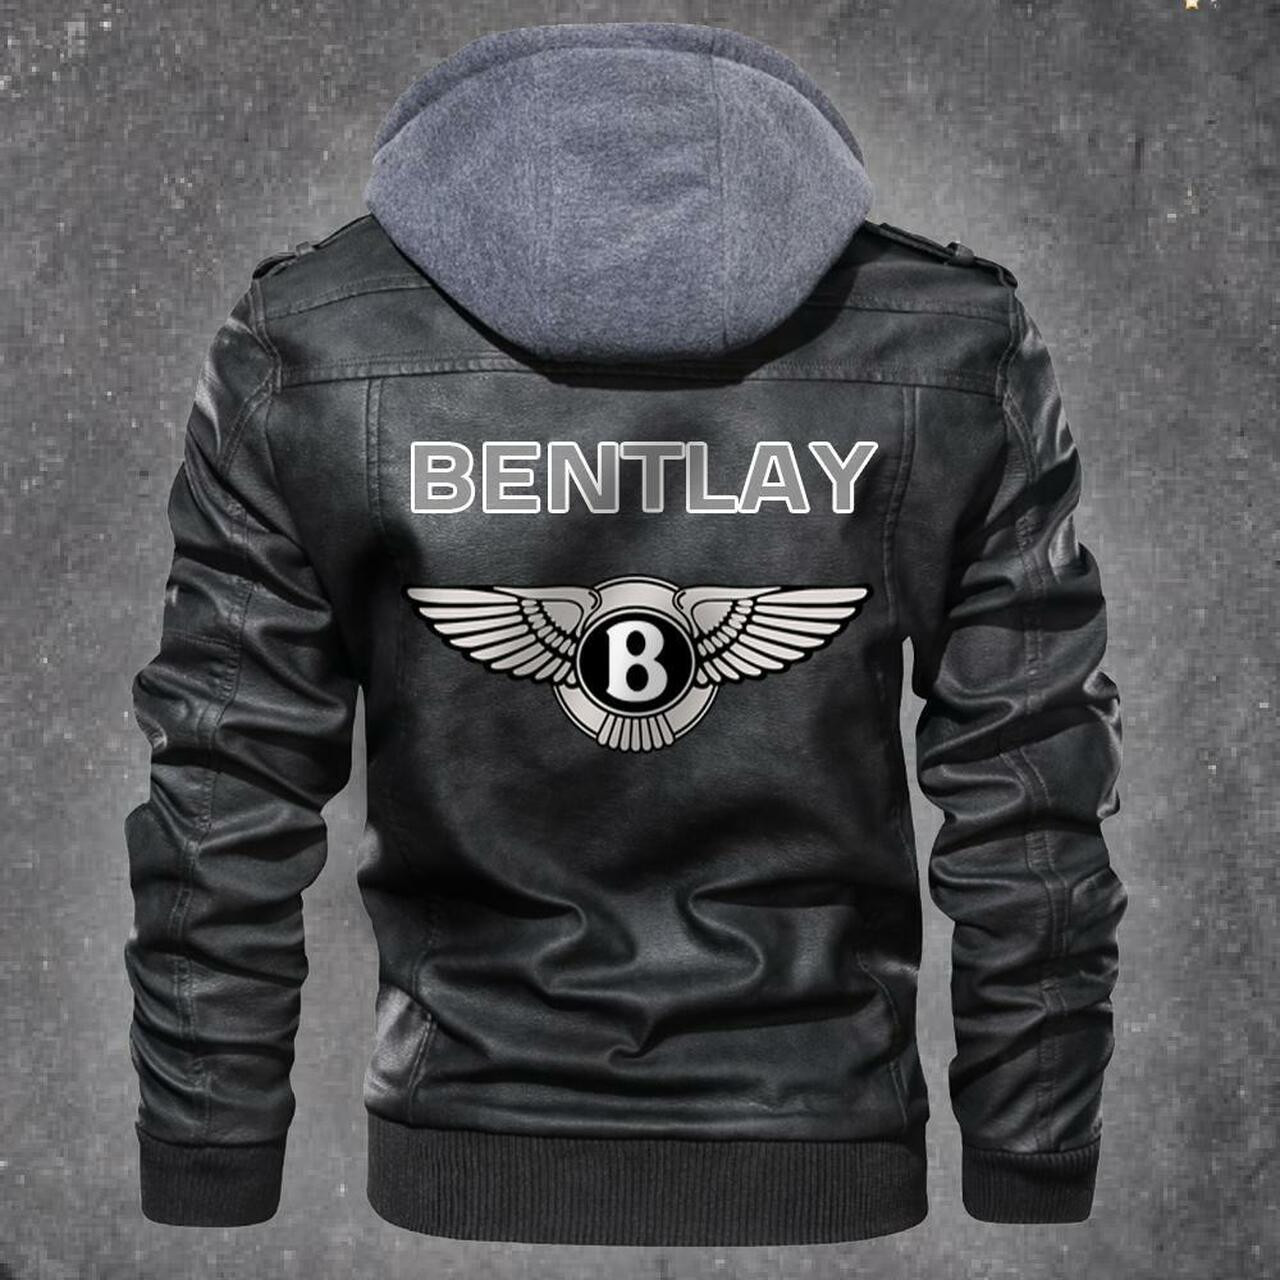 You'll get the best Leather Jacket by shopping online 111